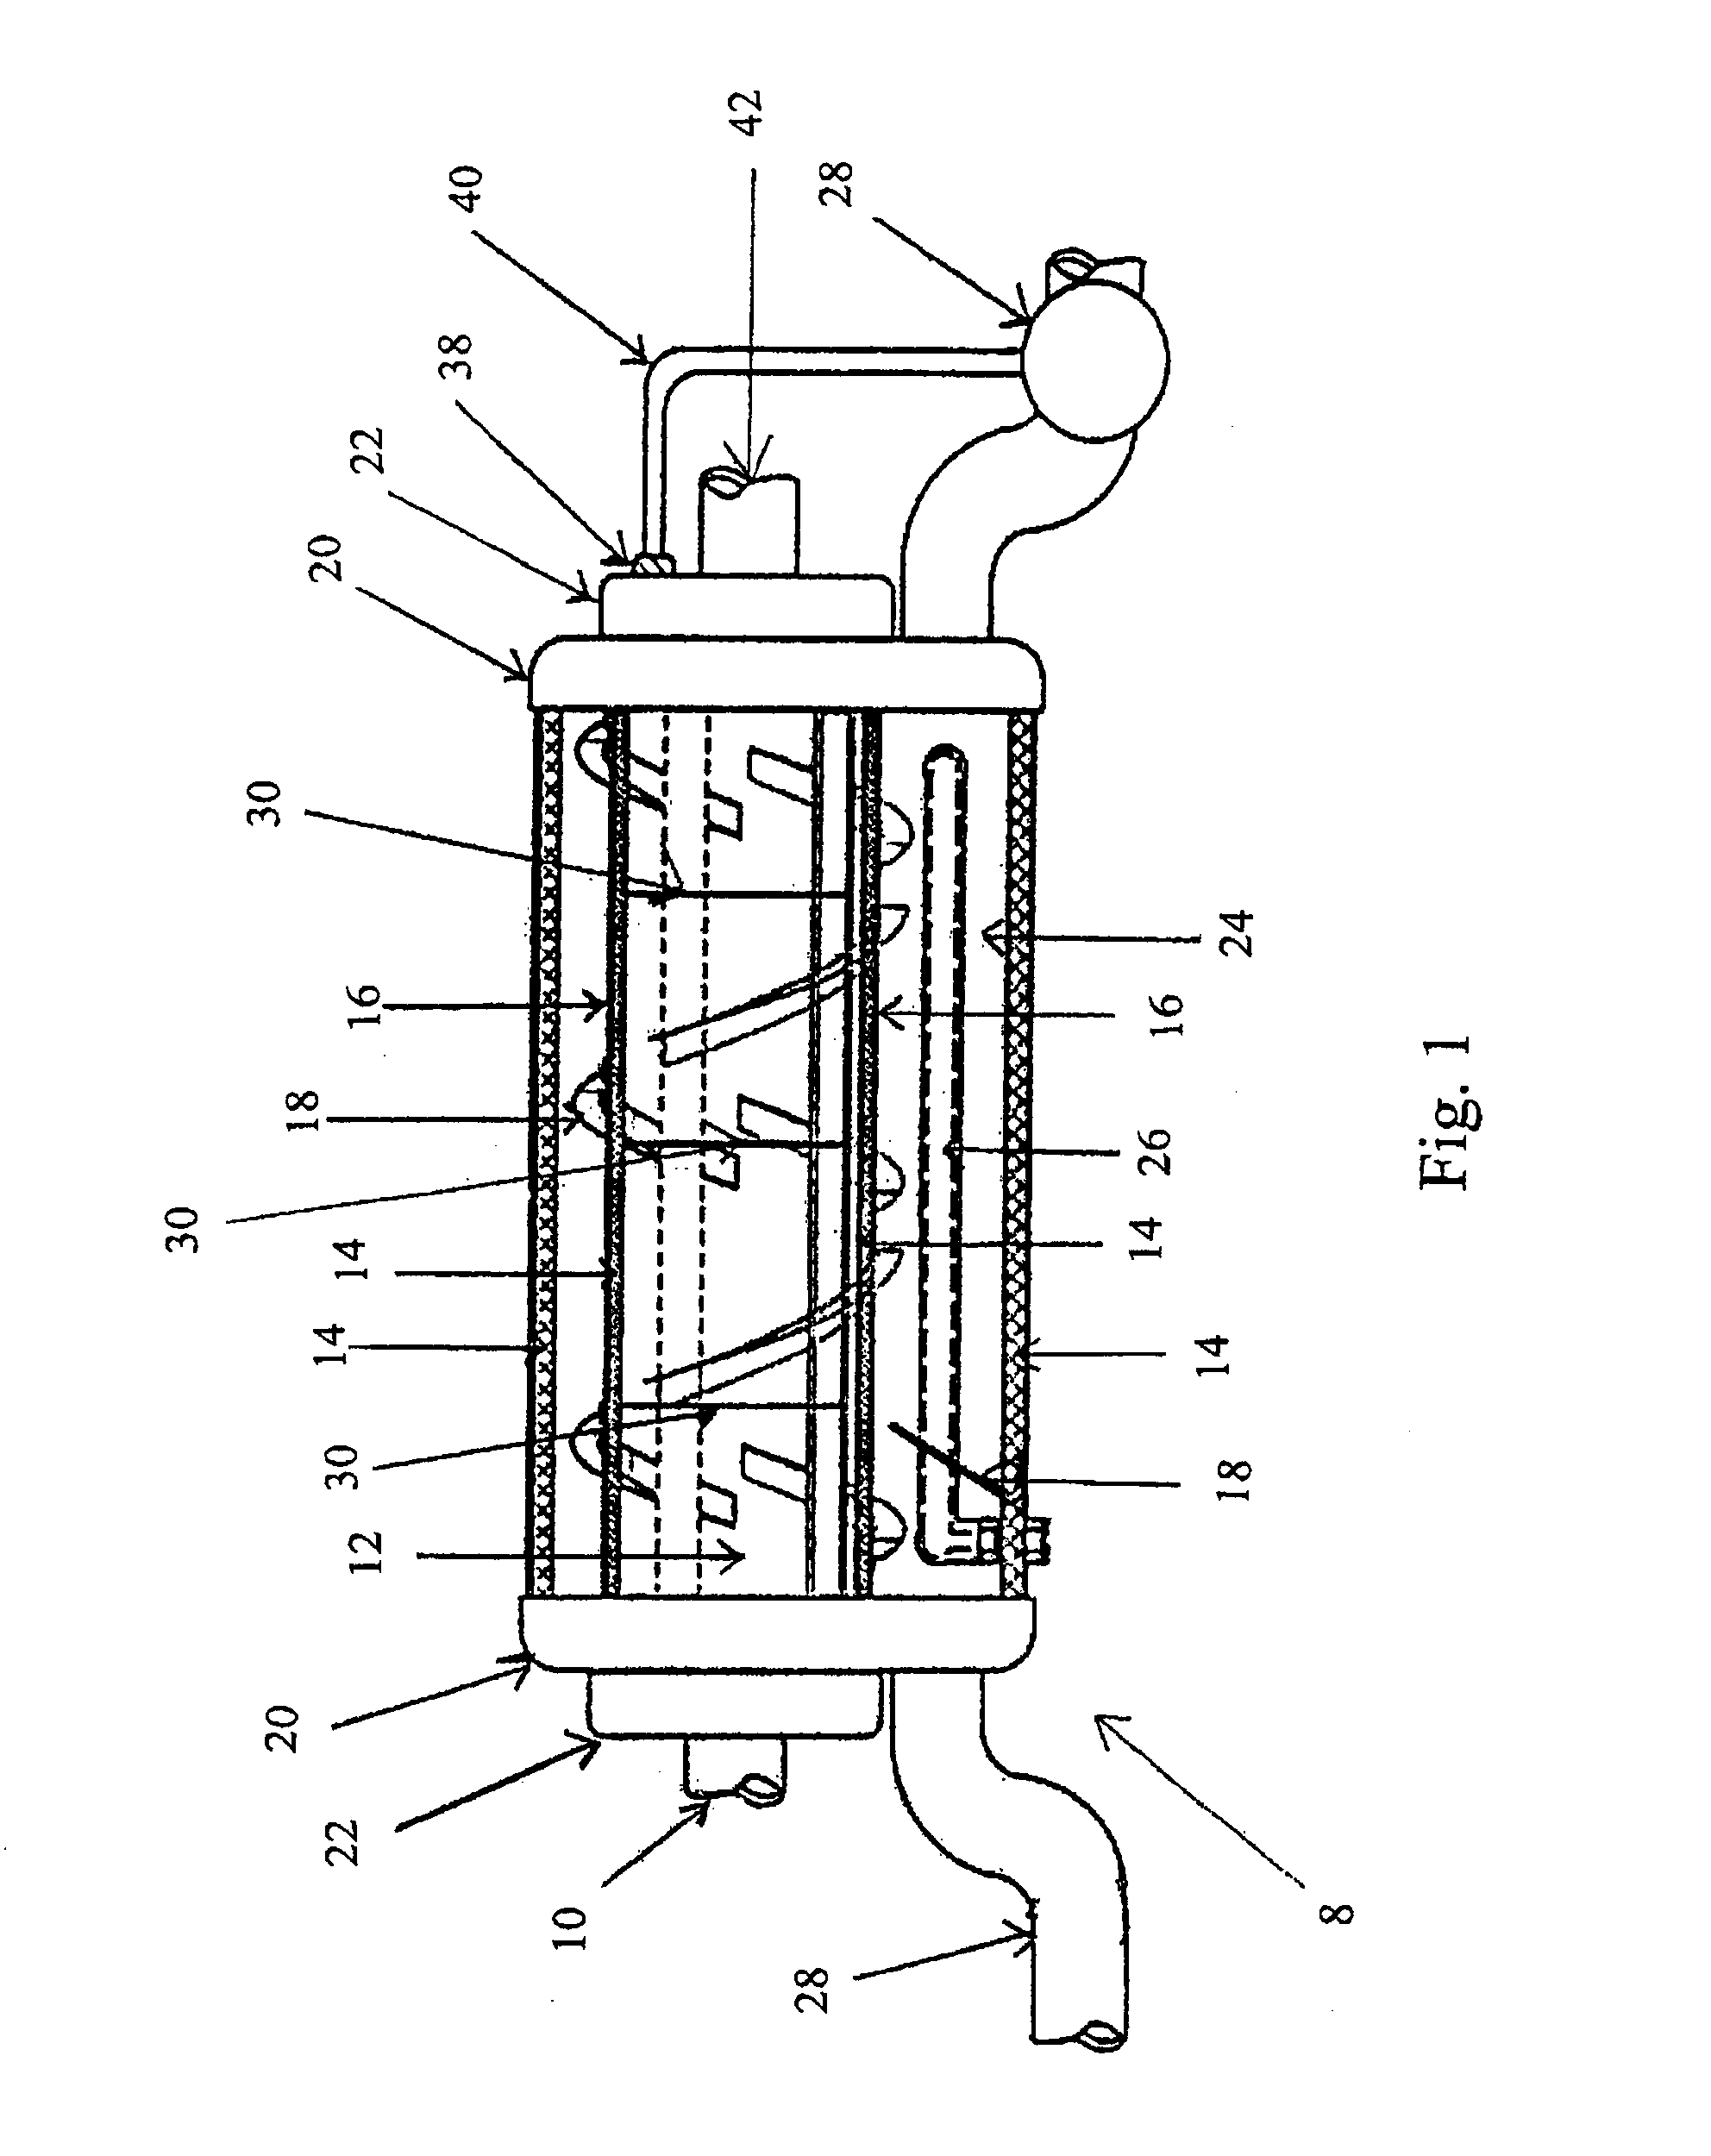 Fuel reforming process for internal combustion engines